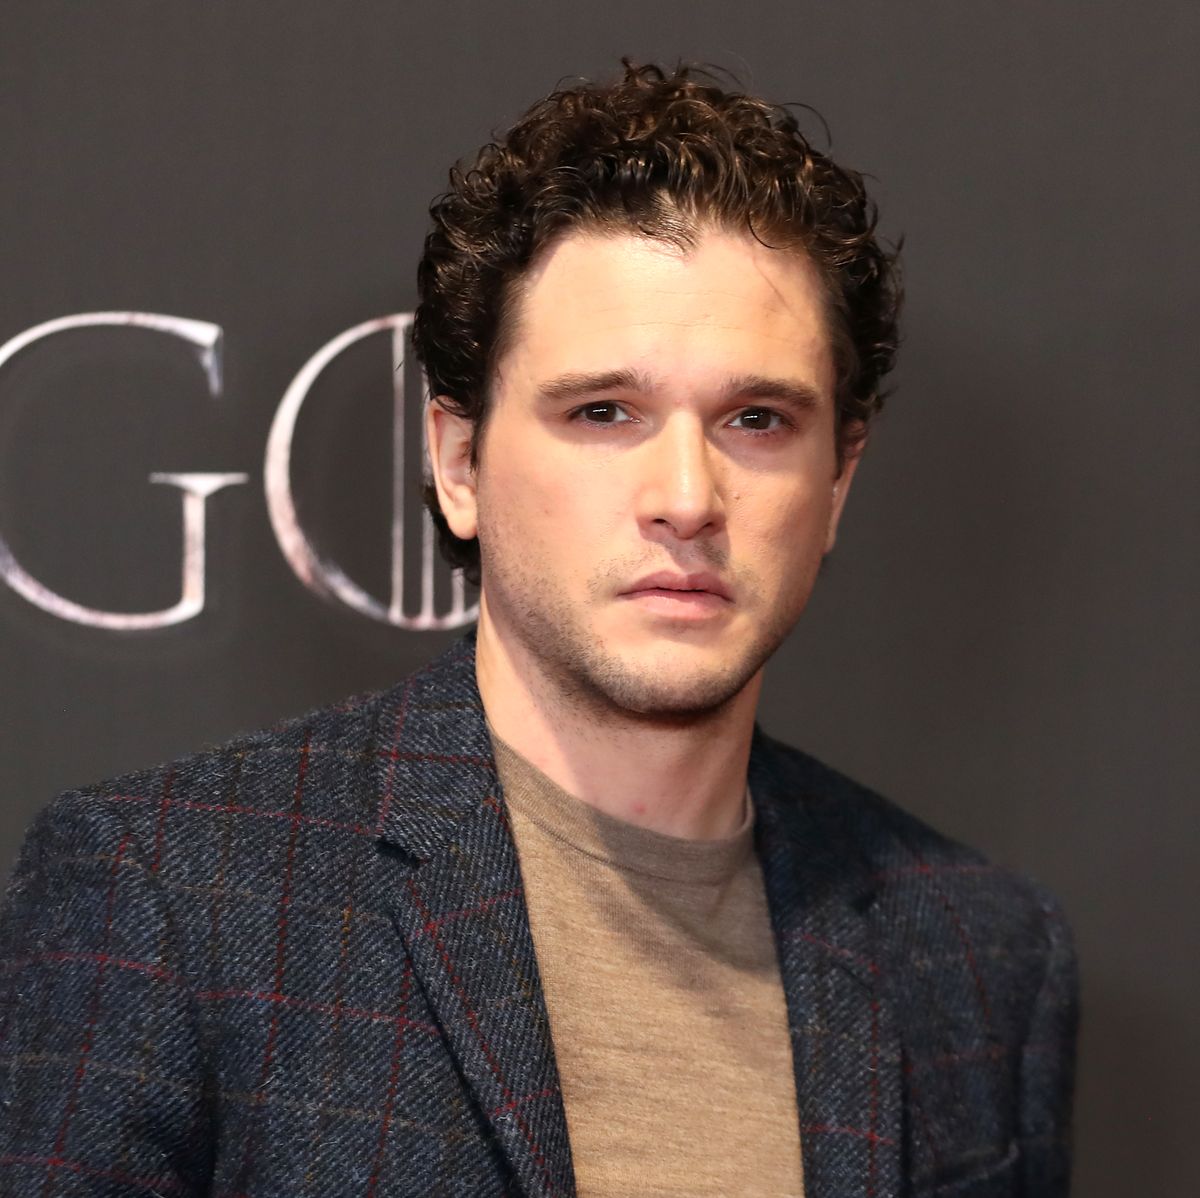 Game of Thrones's Kit Harington Has Checked Into Rehab